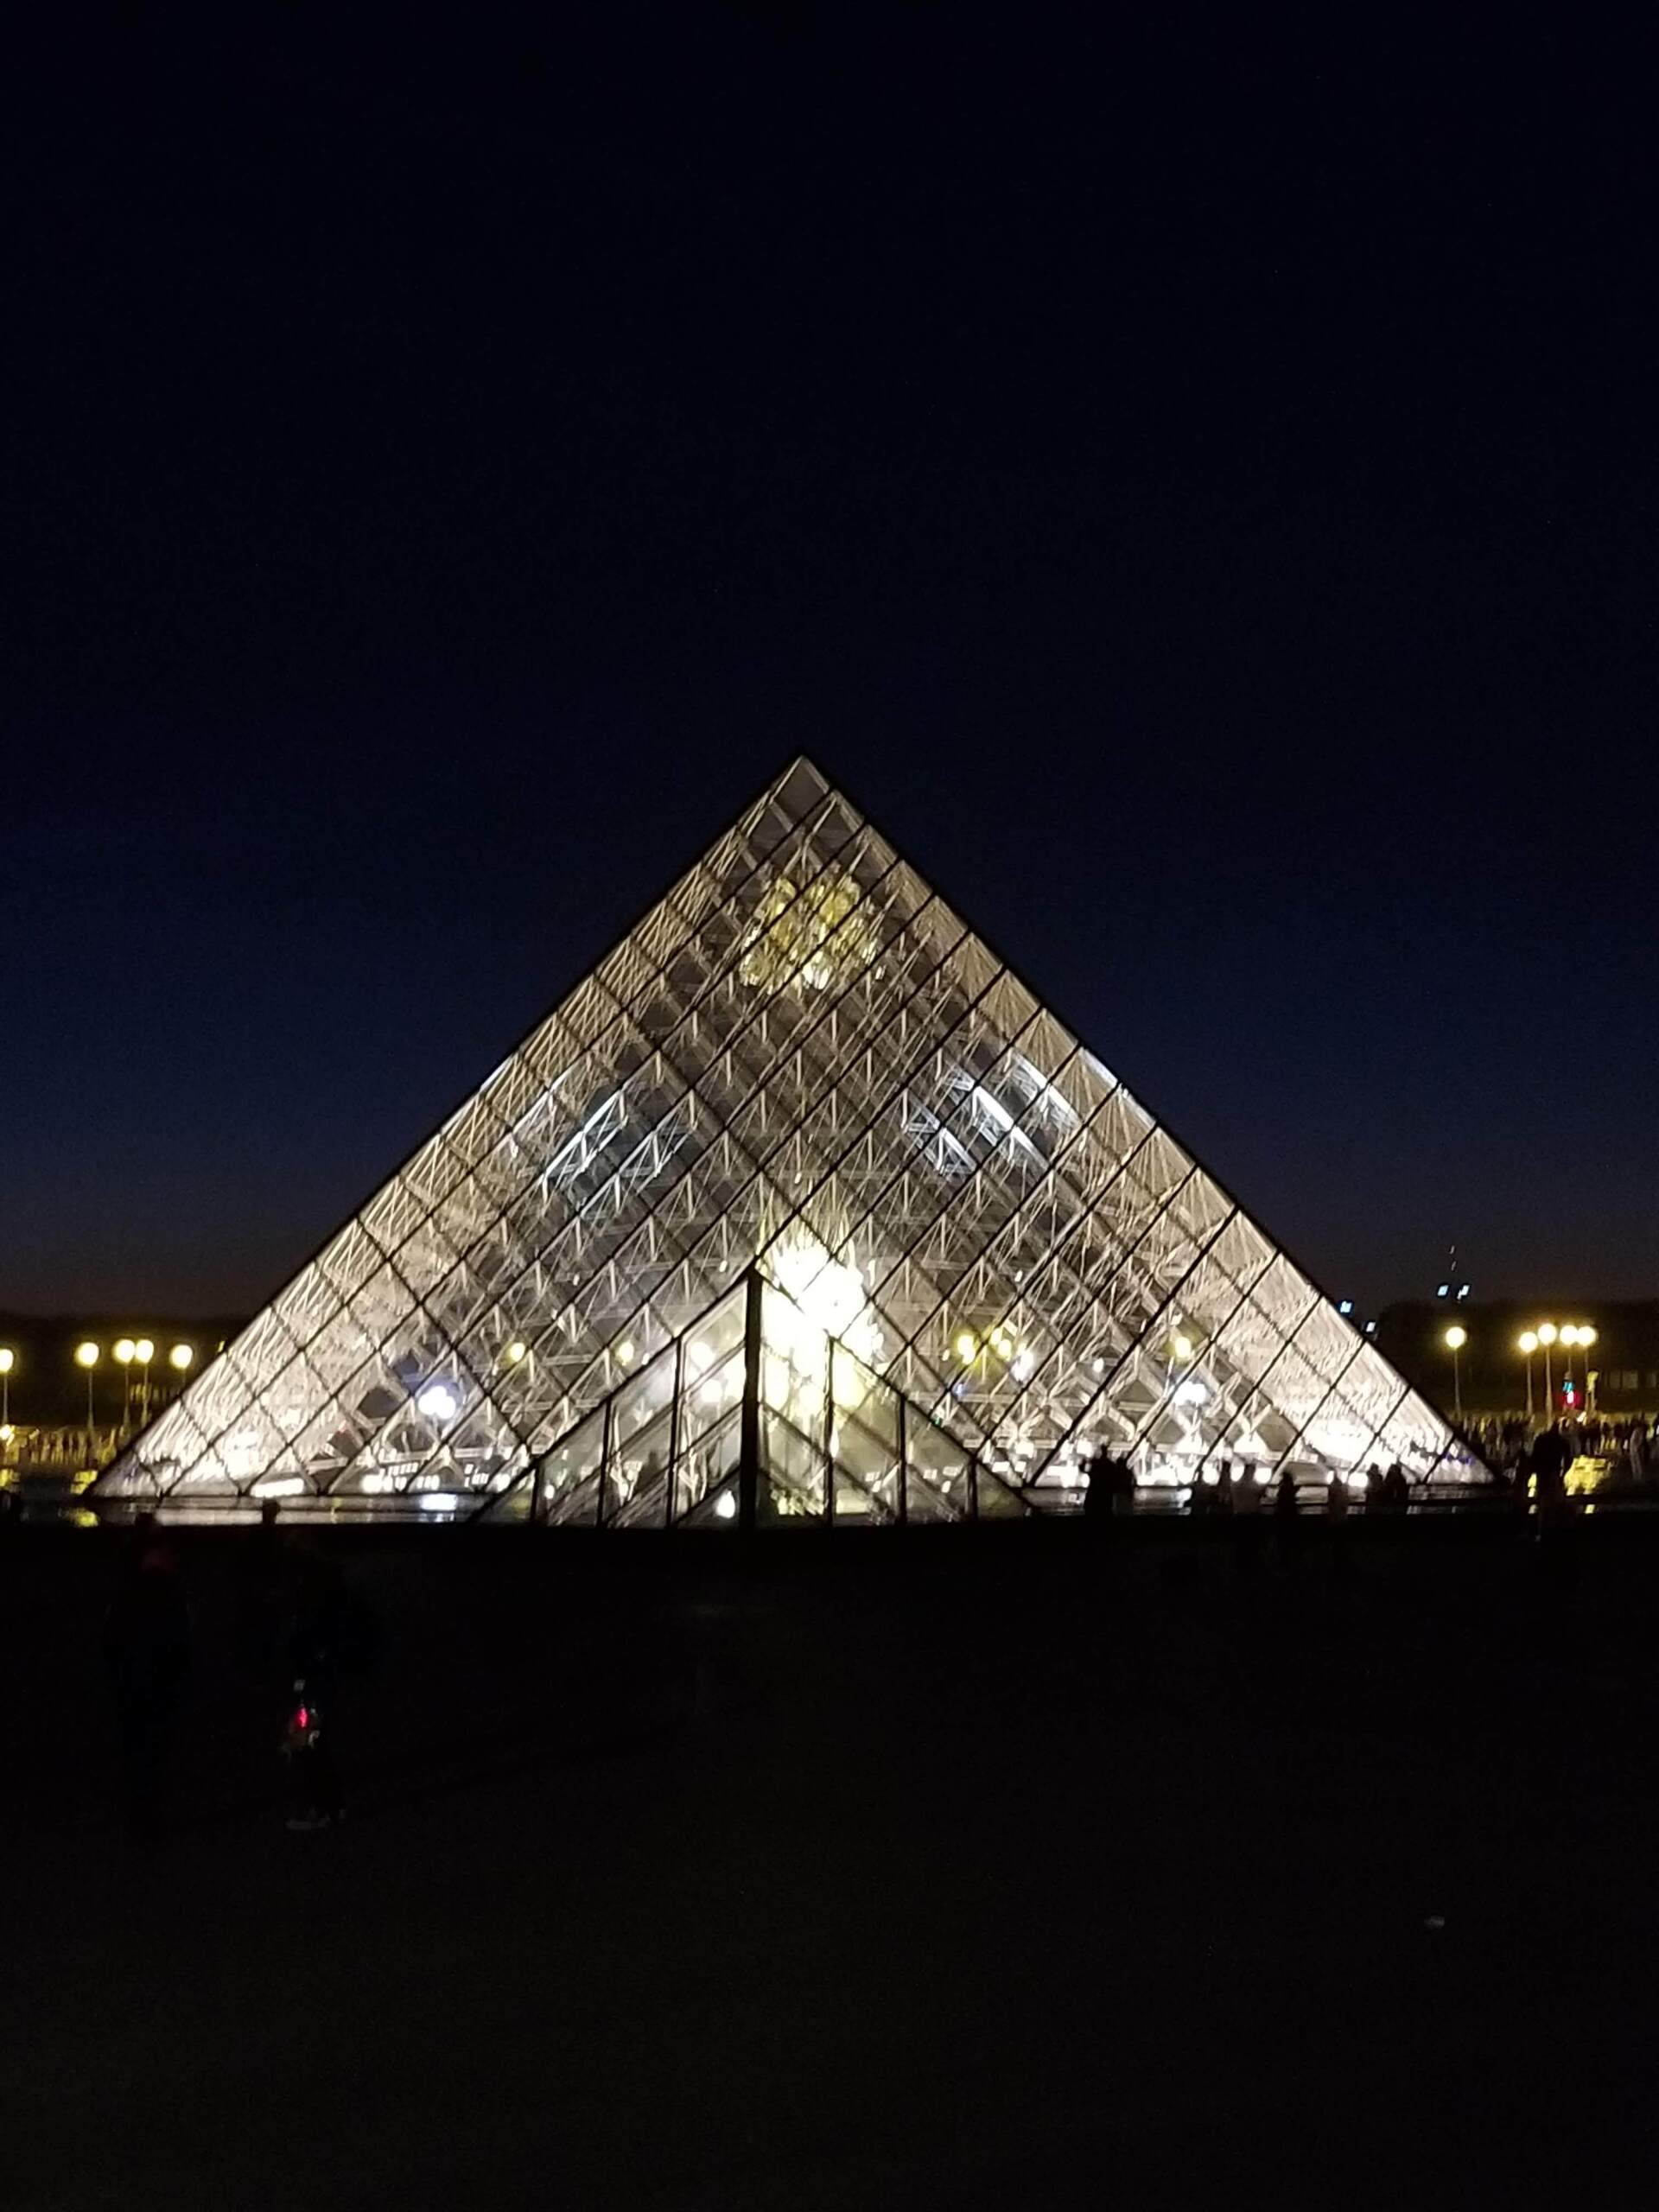 Louvre at  night